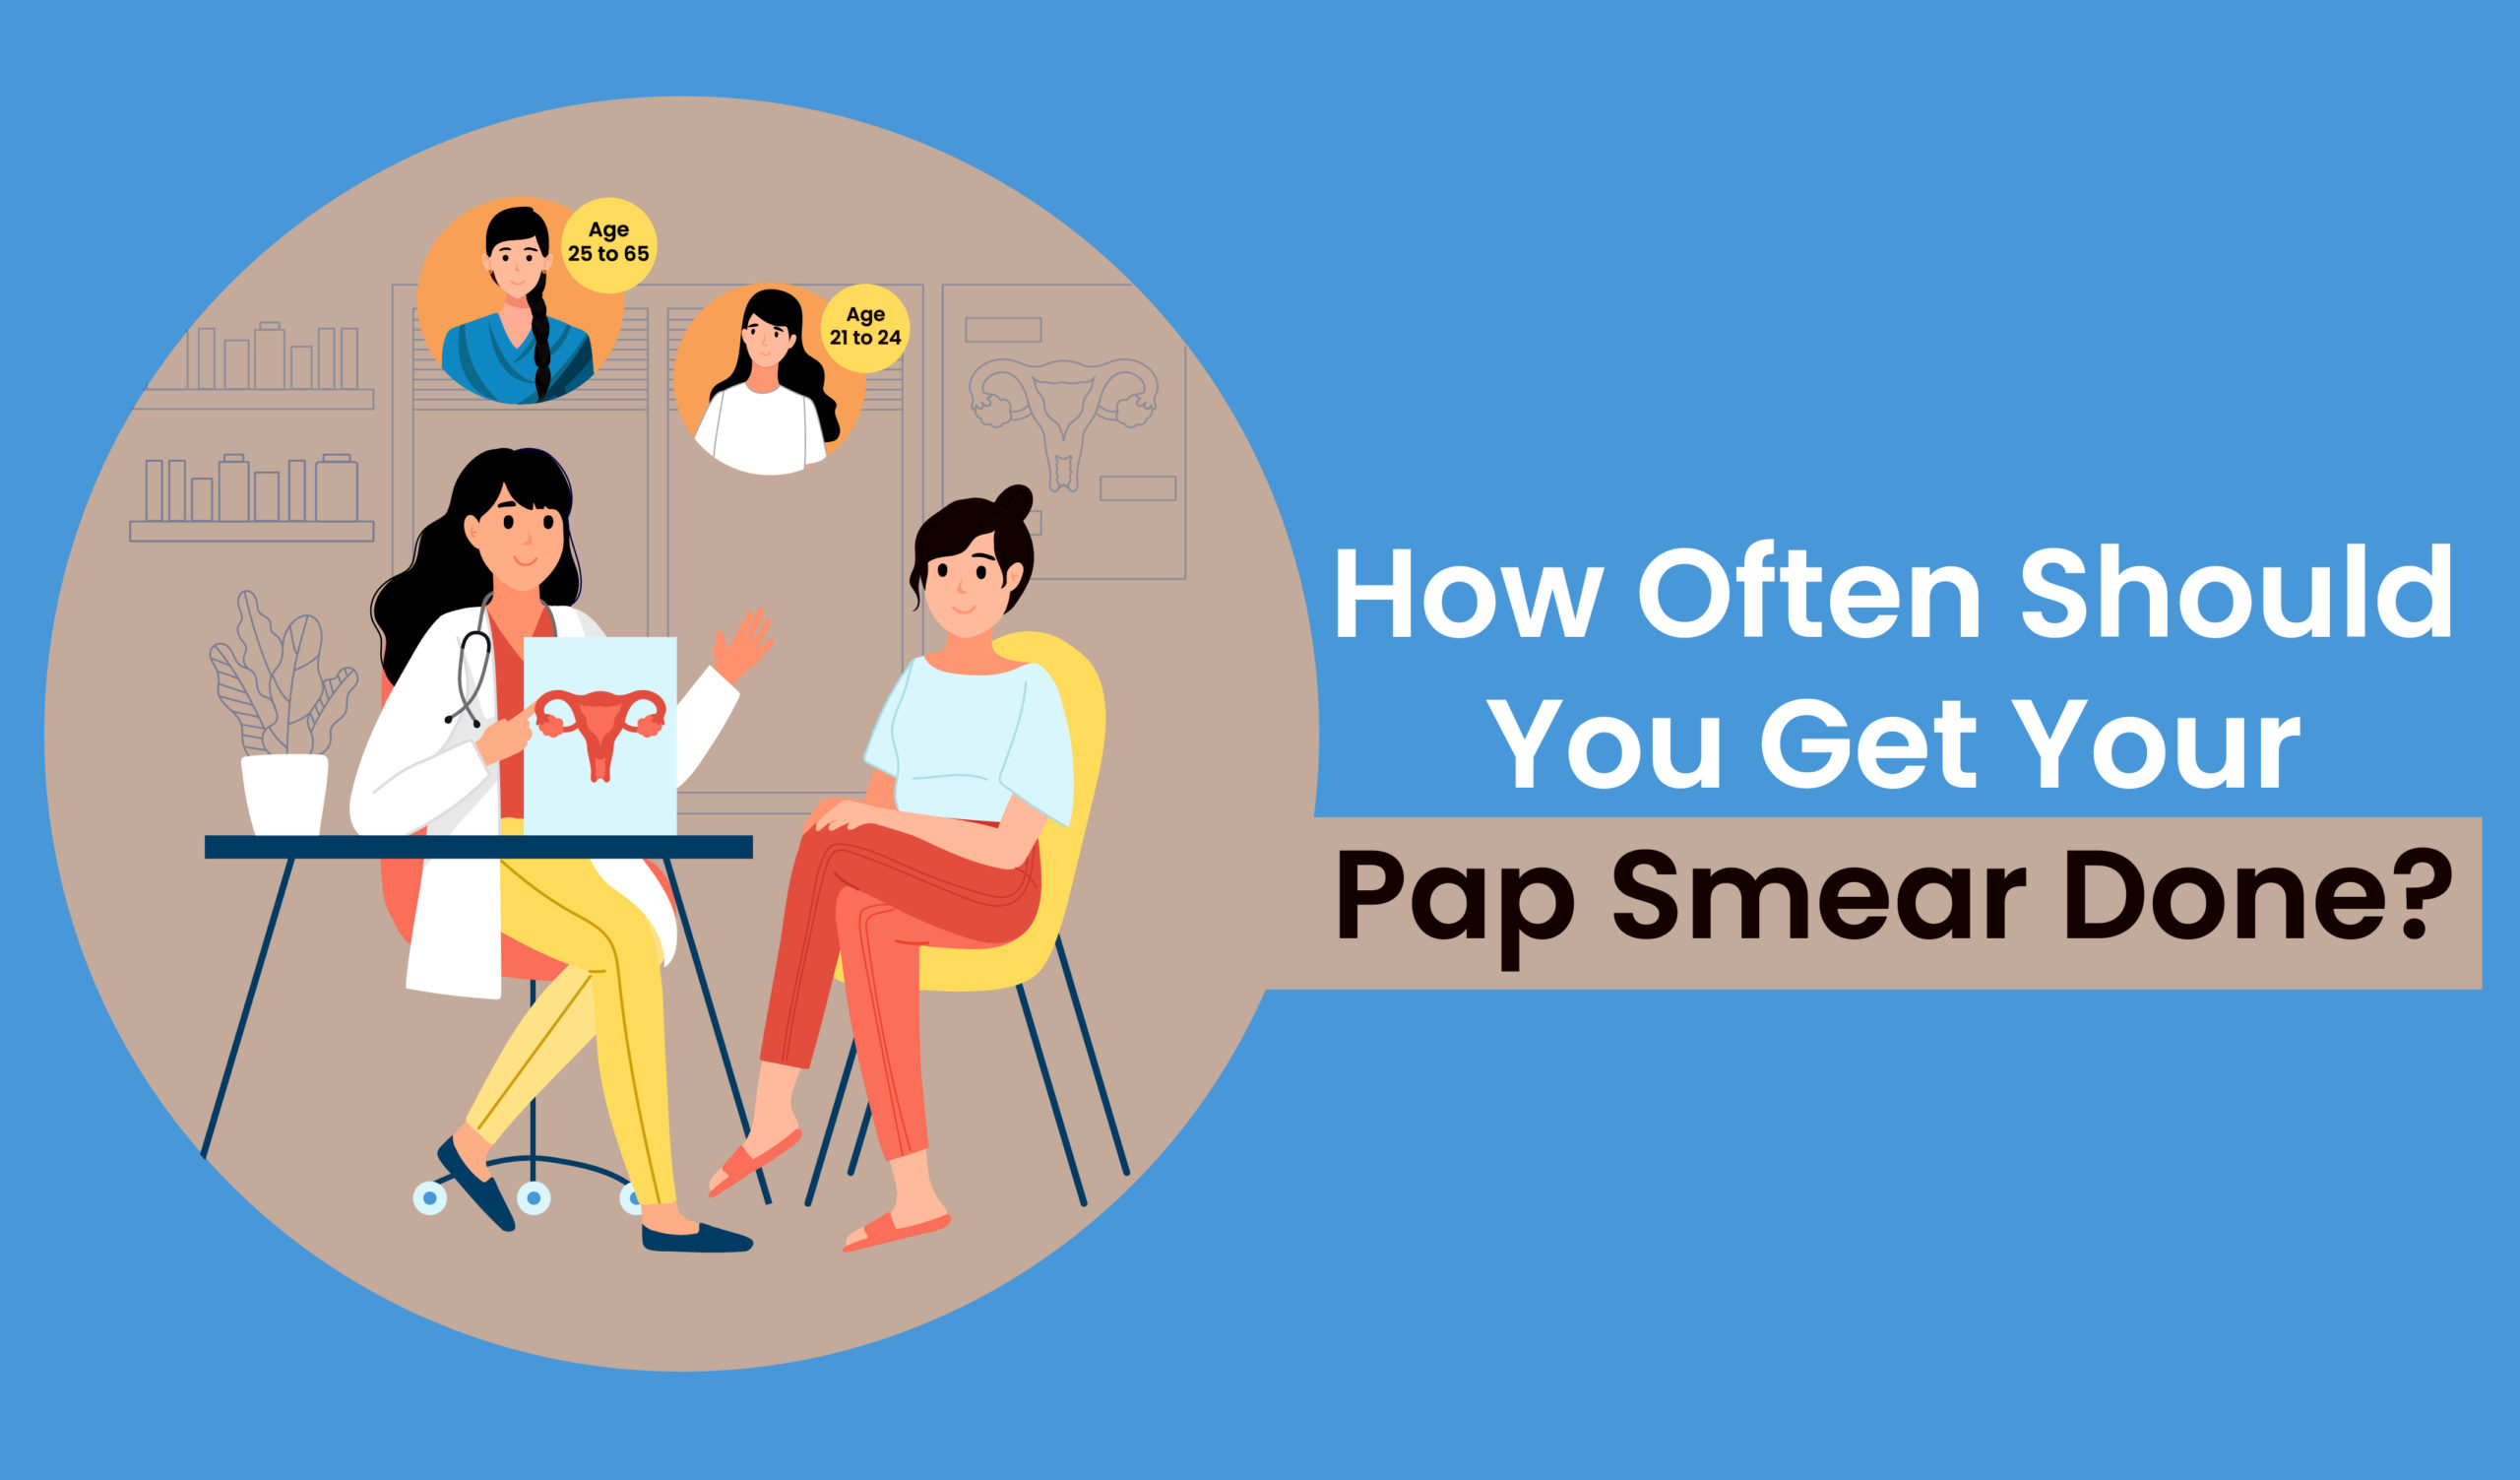 How often should you get your Pap Smear done